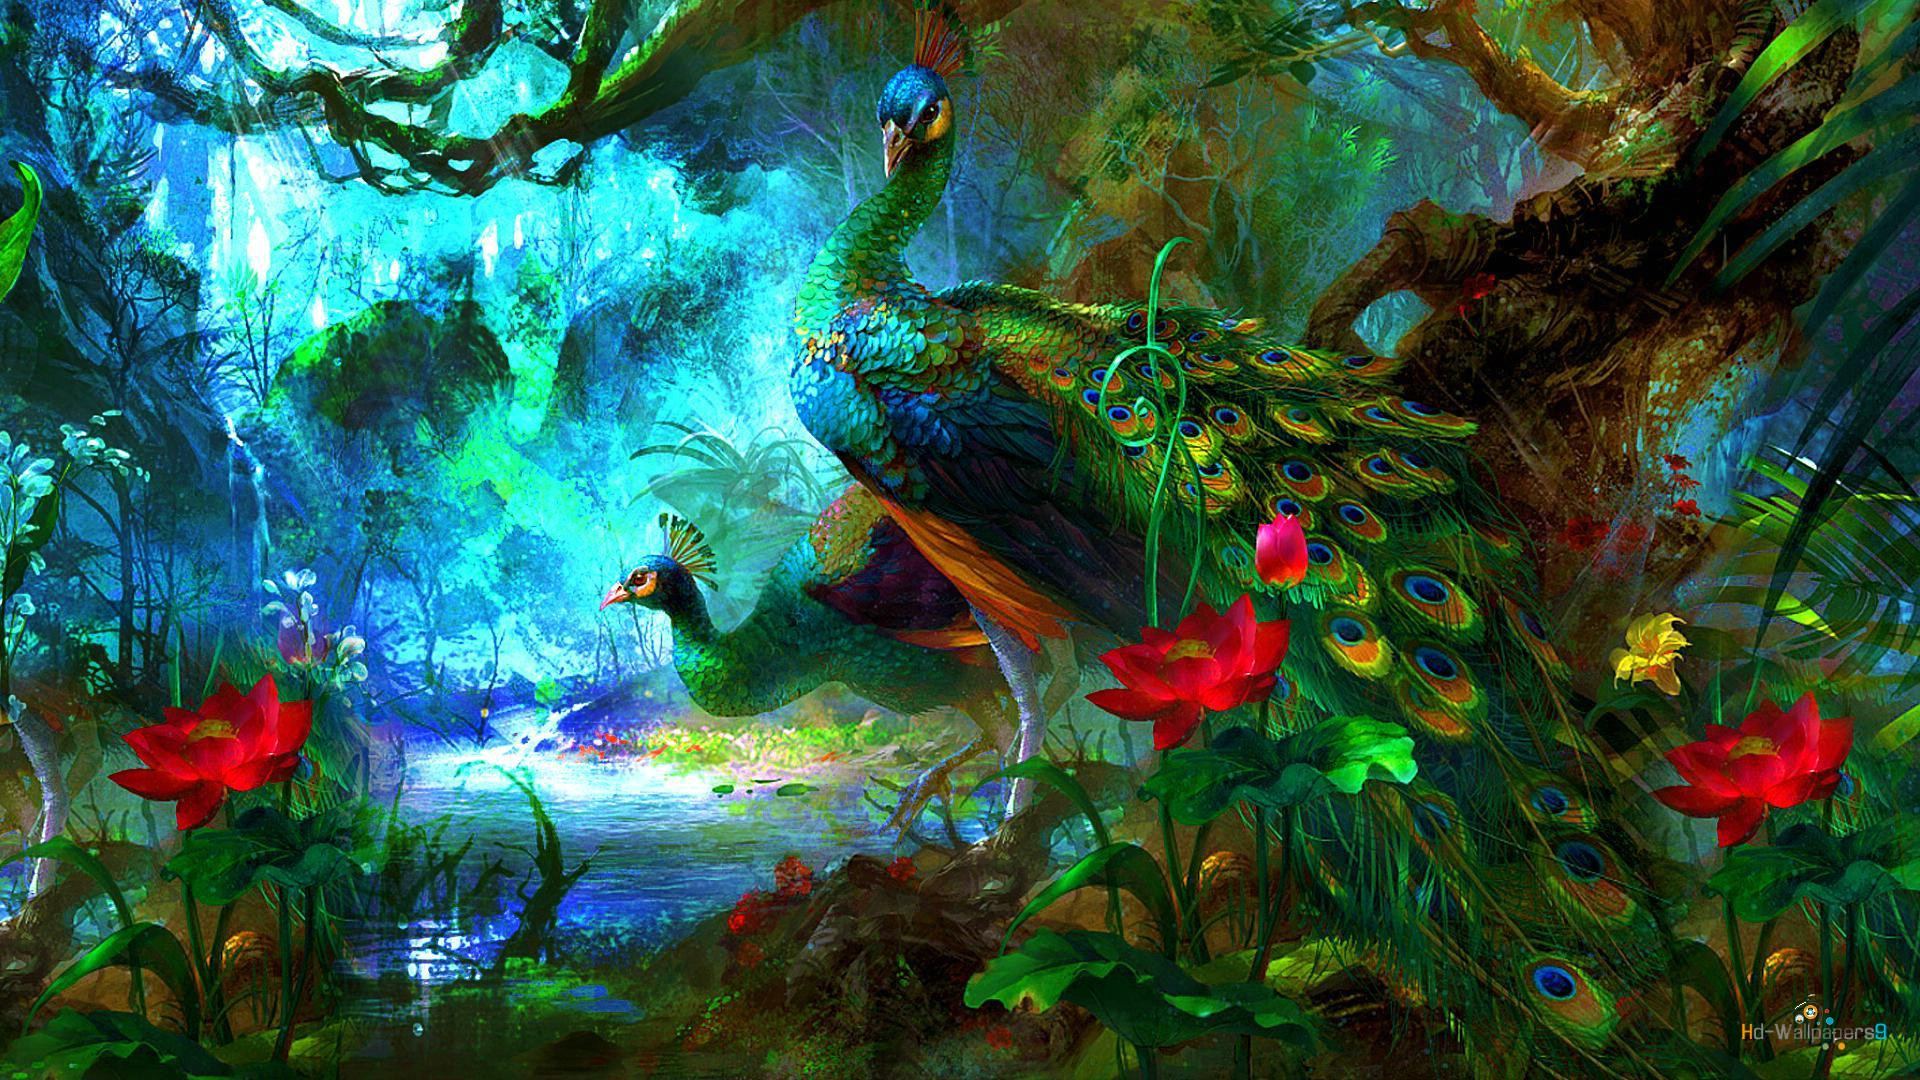 Peacocks in Enchanted Forest